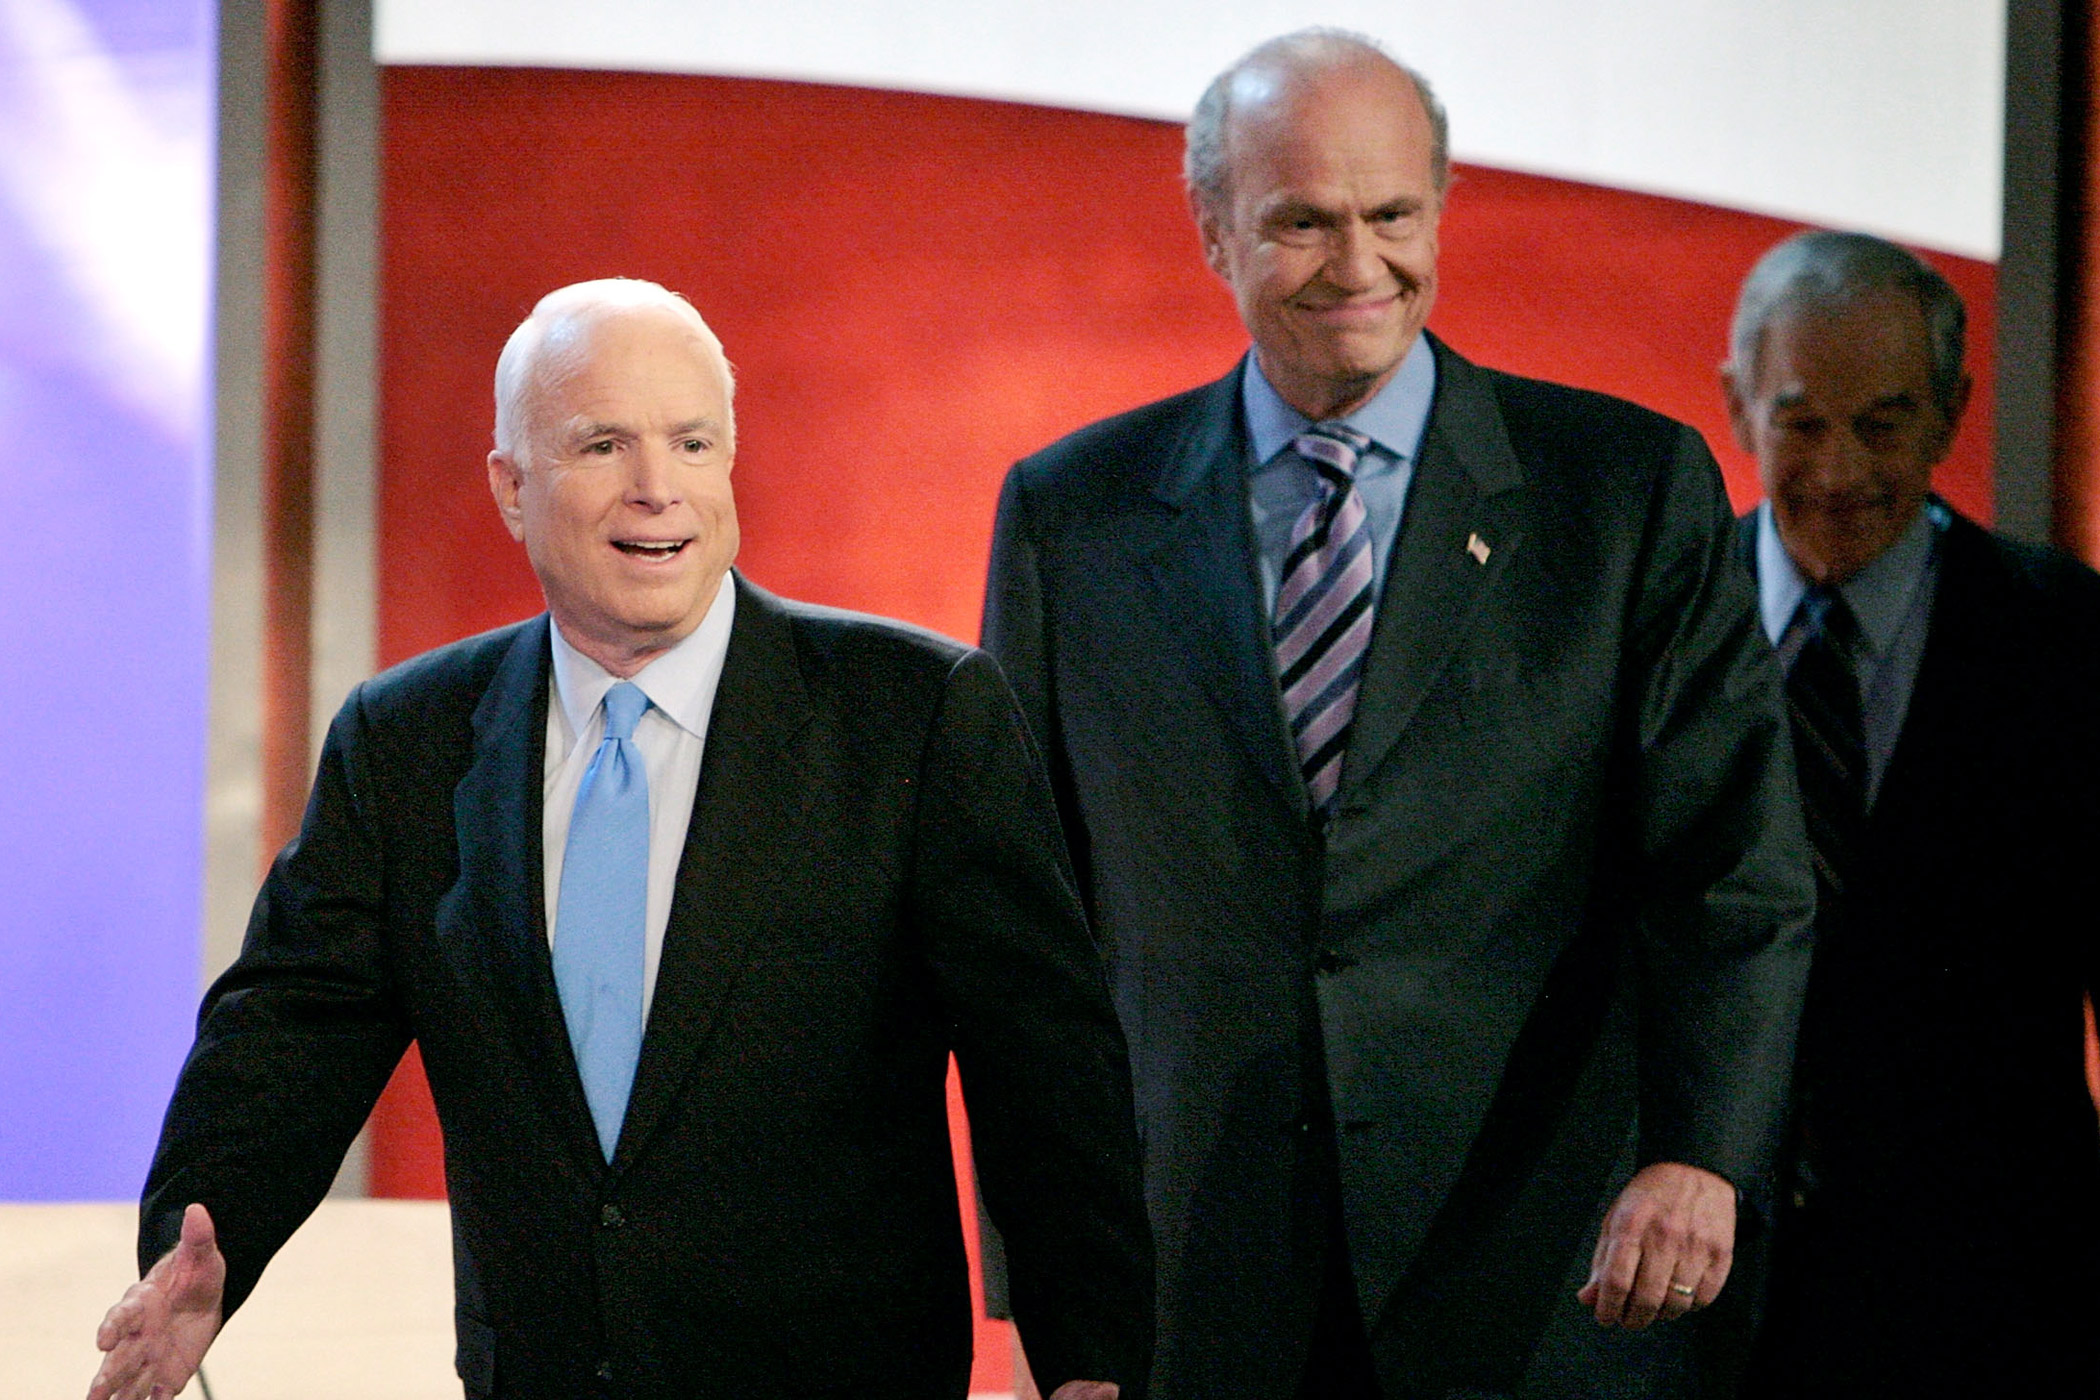 Republican presidential hopefuls Sen. John McCain (R-AZ), left, and U.S. Sen. Fred Thompson (R-TN), take the stage to participate in a  debate on Jan. 5, 2008 in Manchester, N.H.